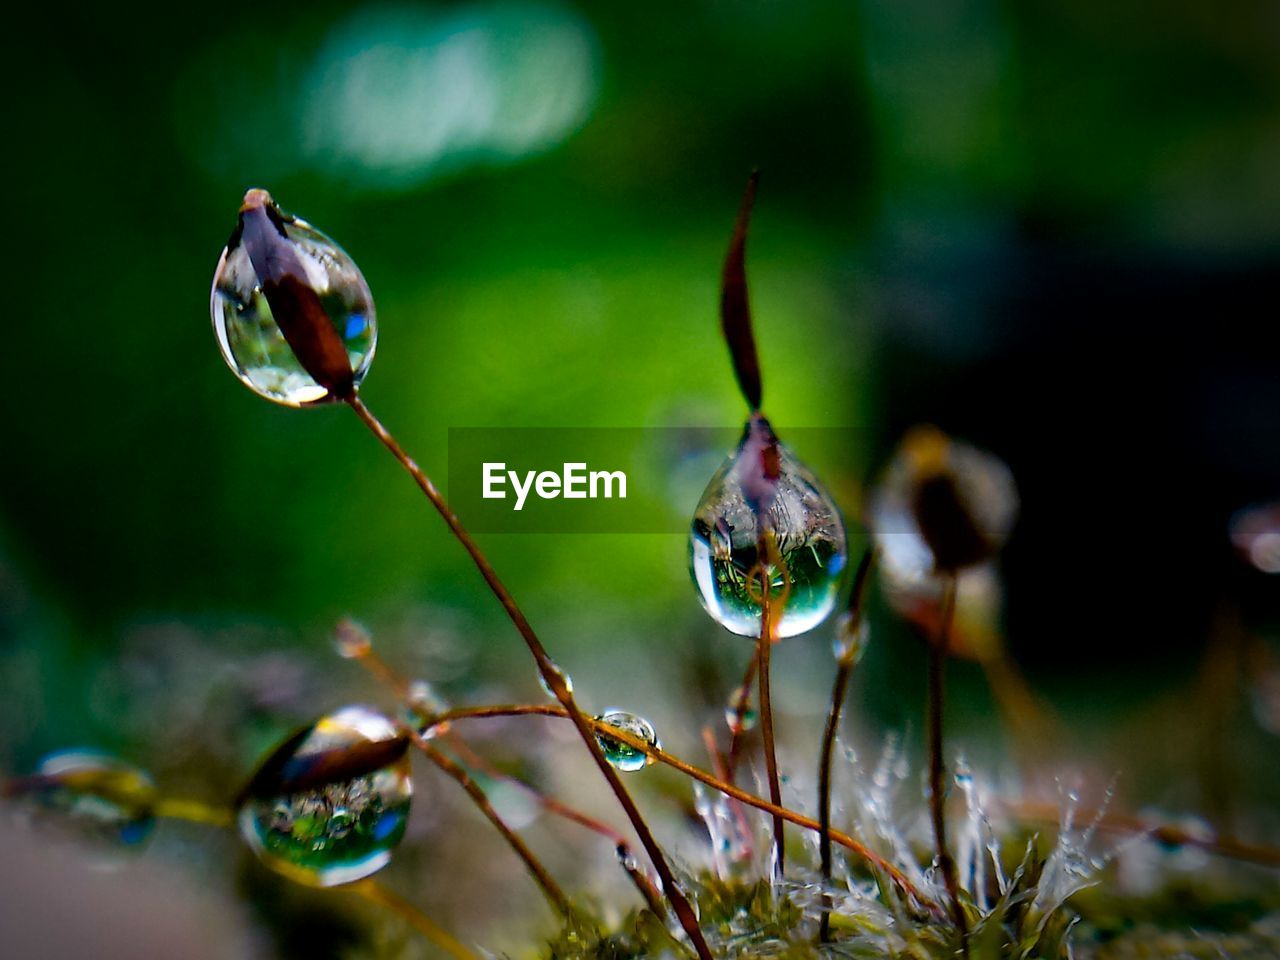 CLOSE-UP OF WATER DROPS ON FLOWER AGAINST BLURRED BACKGROUND